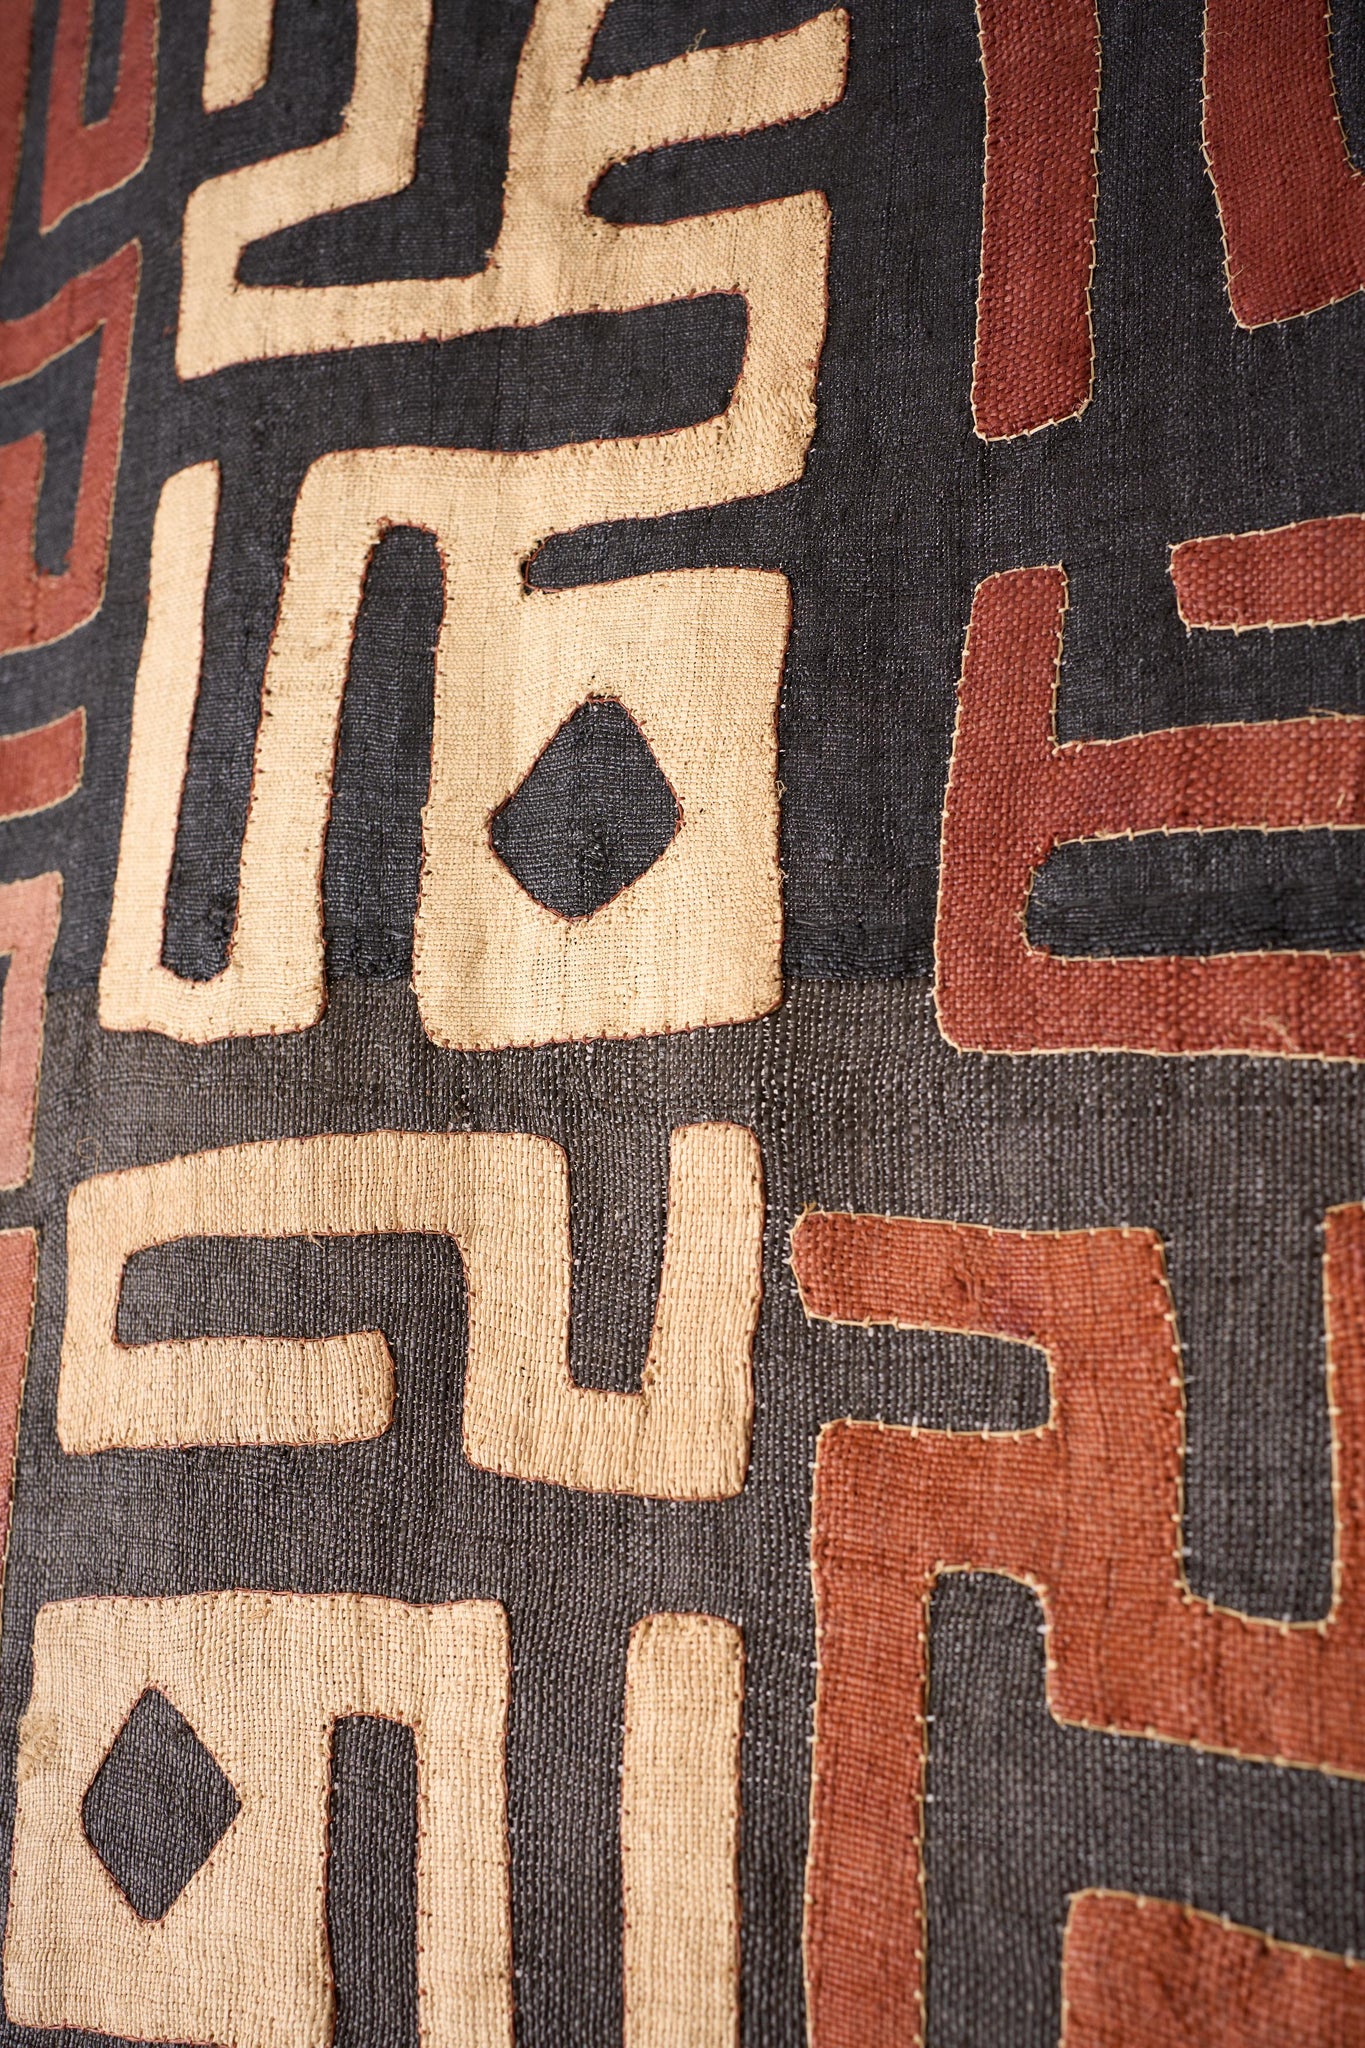 20th century African Kuba cloth from the Congo - Red and black